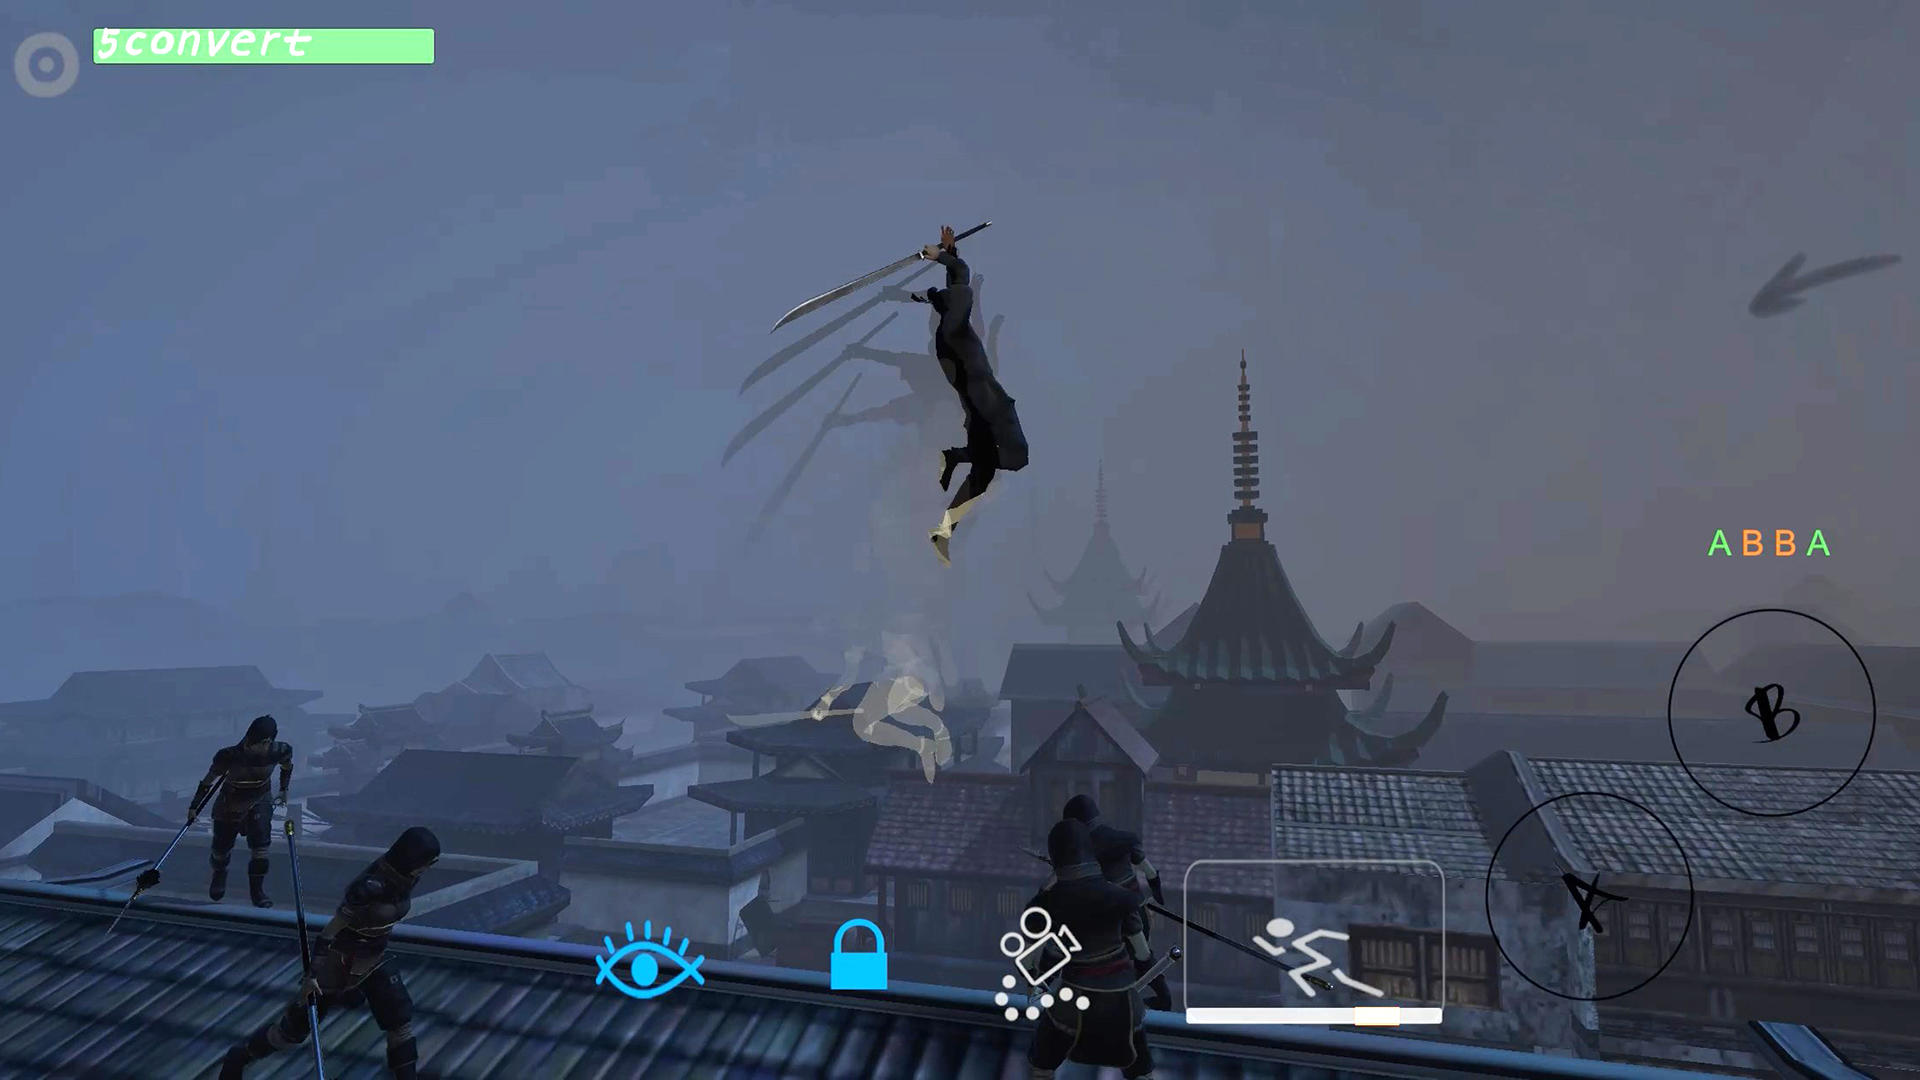 Assassin's Creed Mirage android iOS pre-register-TapTap